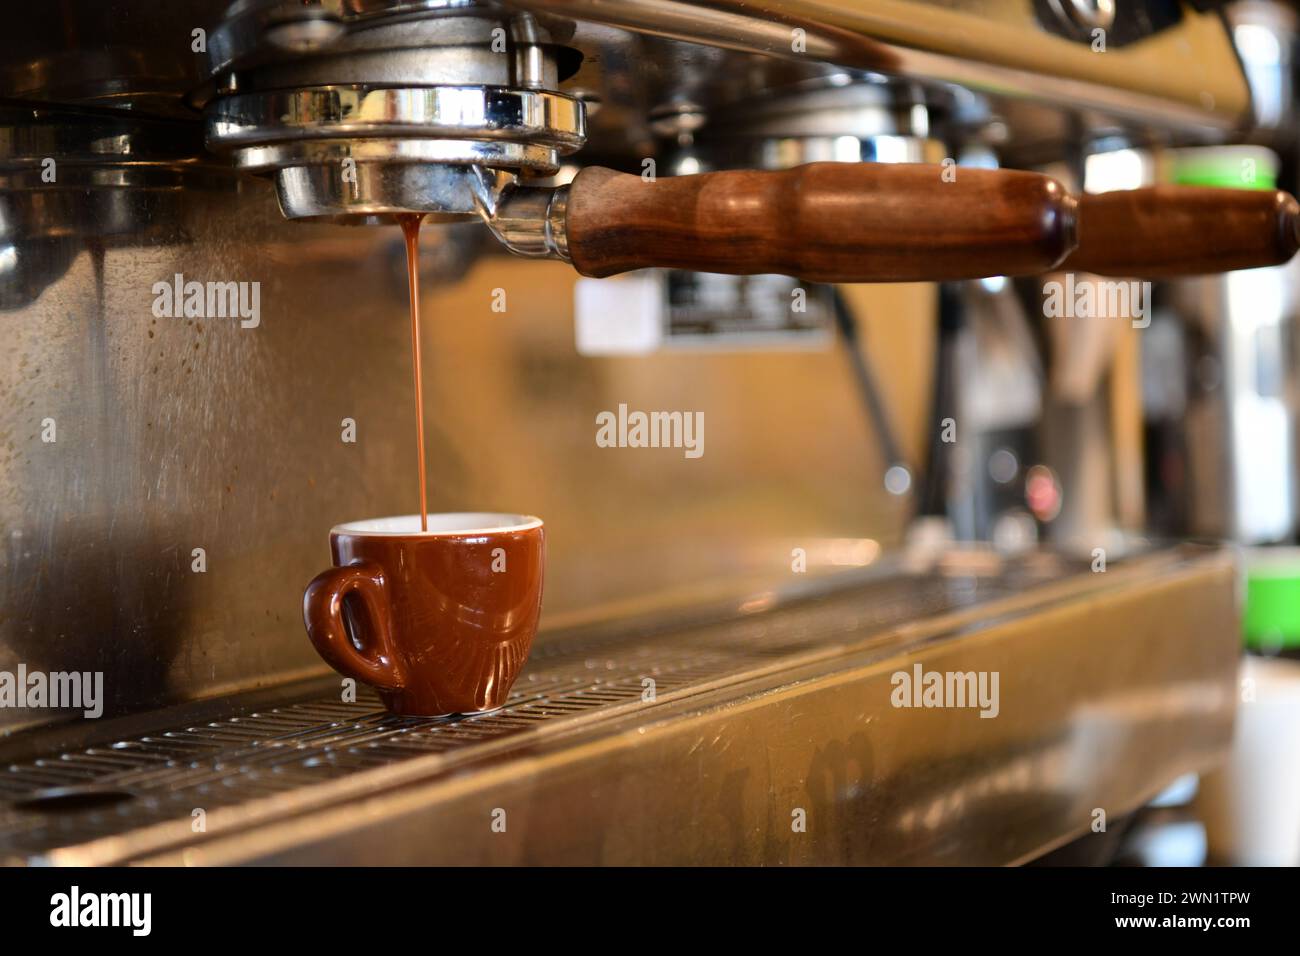 Food Drink An espresso machine making an espresso coffee in a cafe Stock Photo